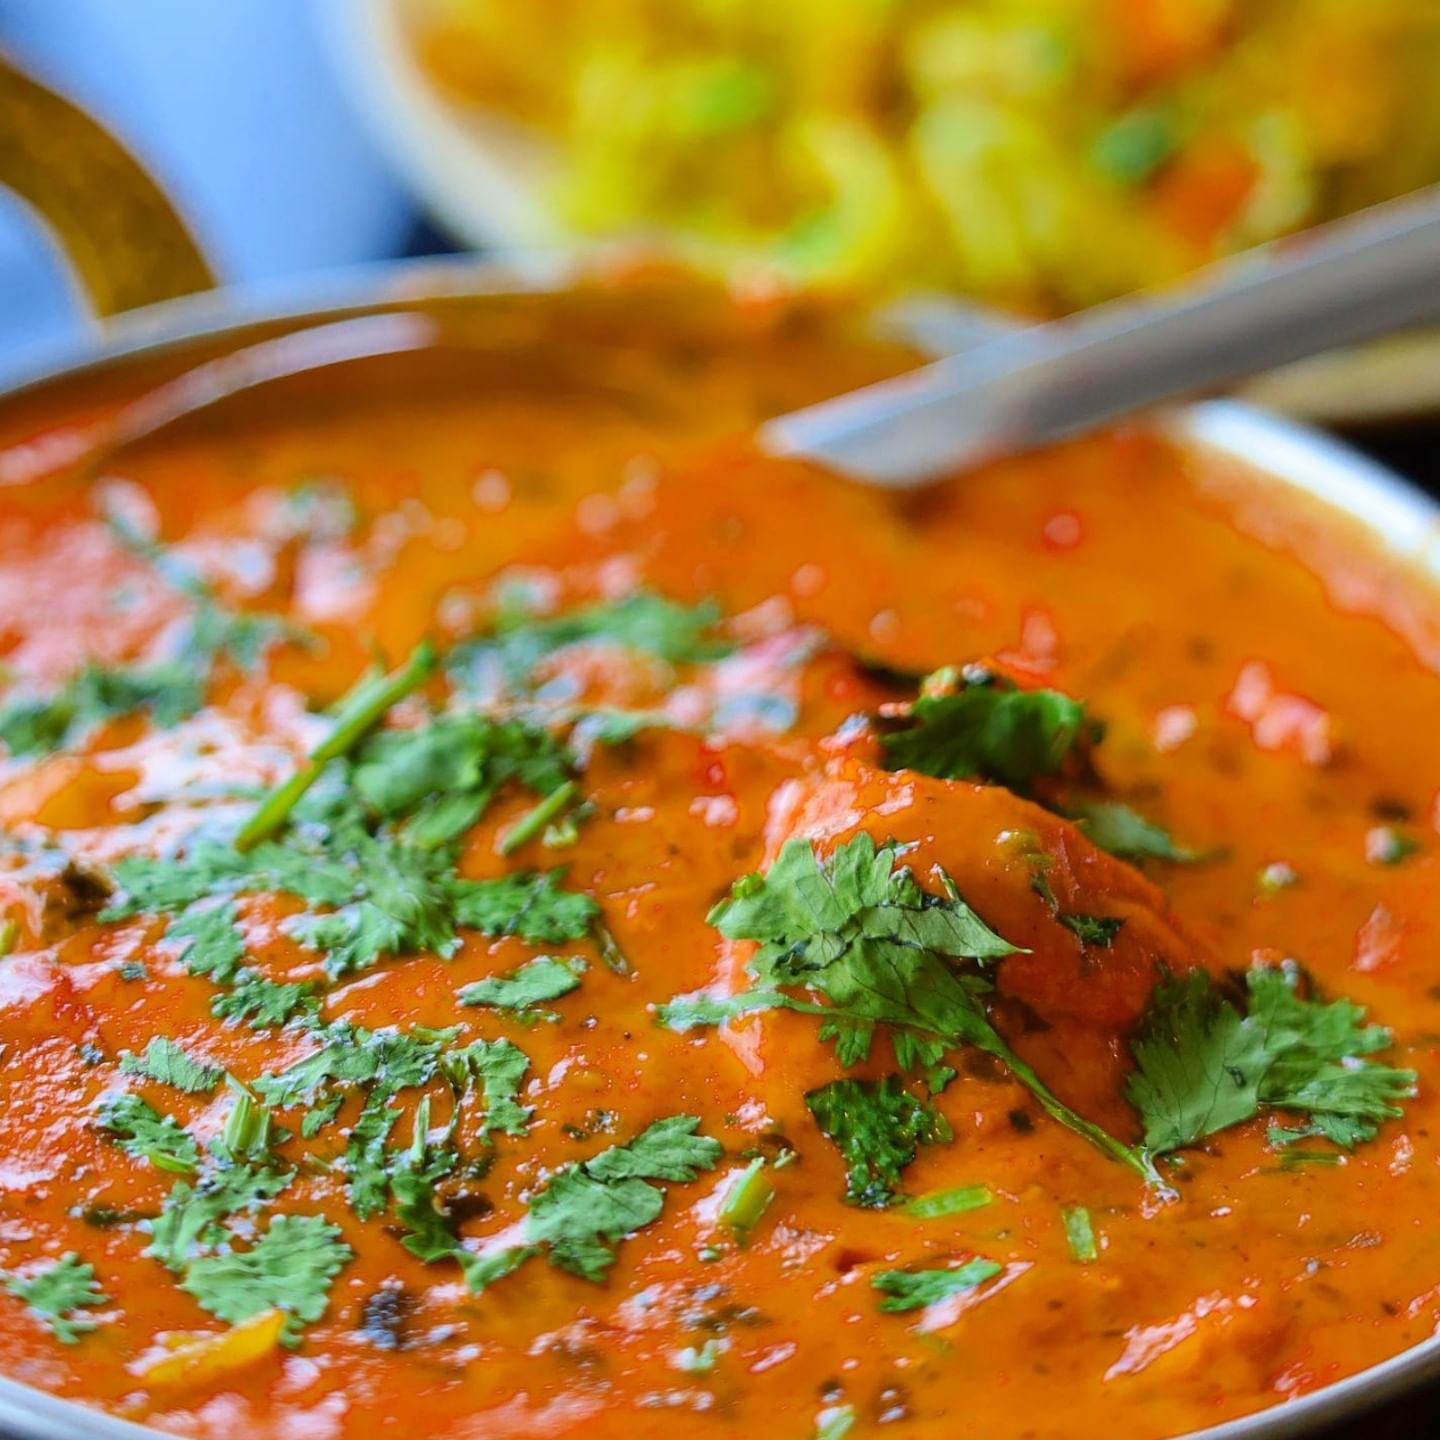 Delicious Food from Northern India